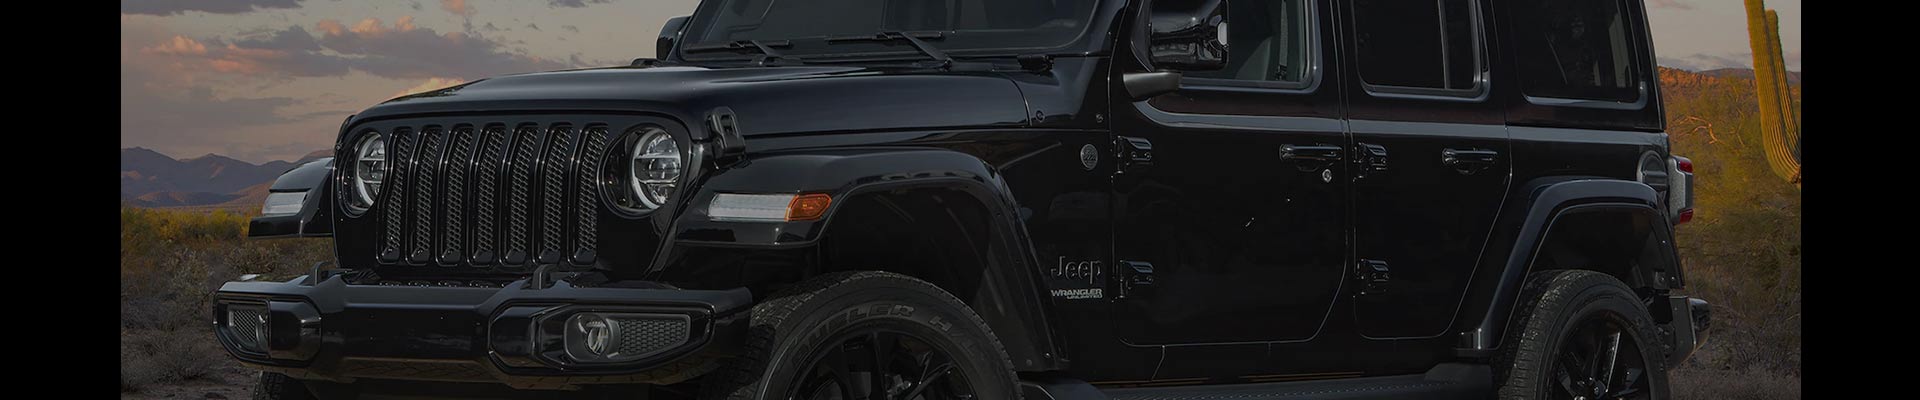 Shop Replacement and OEM 2010 Jeep Wrangler Parts with Discounted Price on the Net